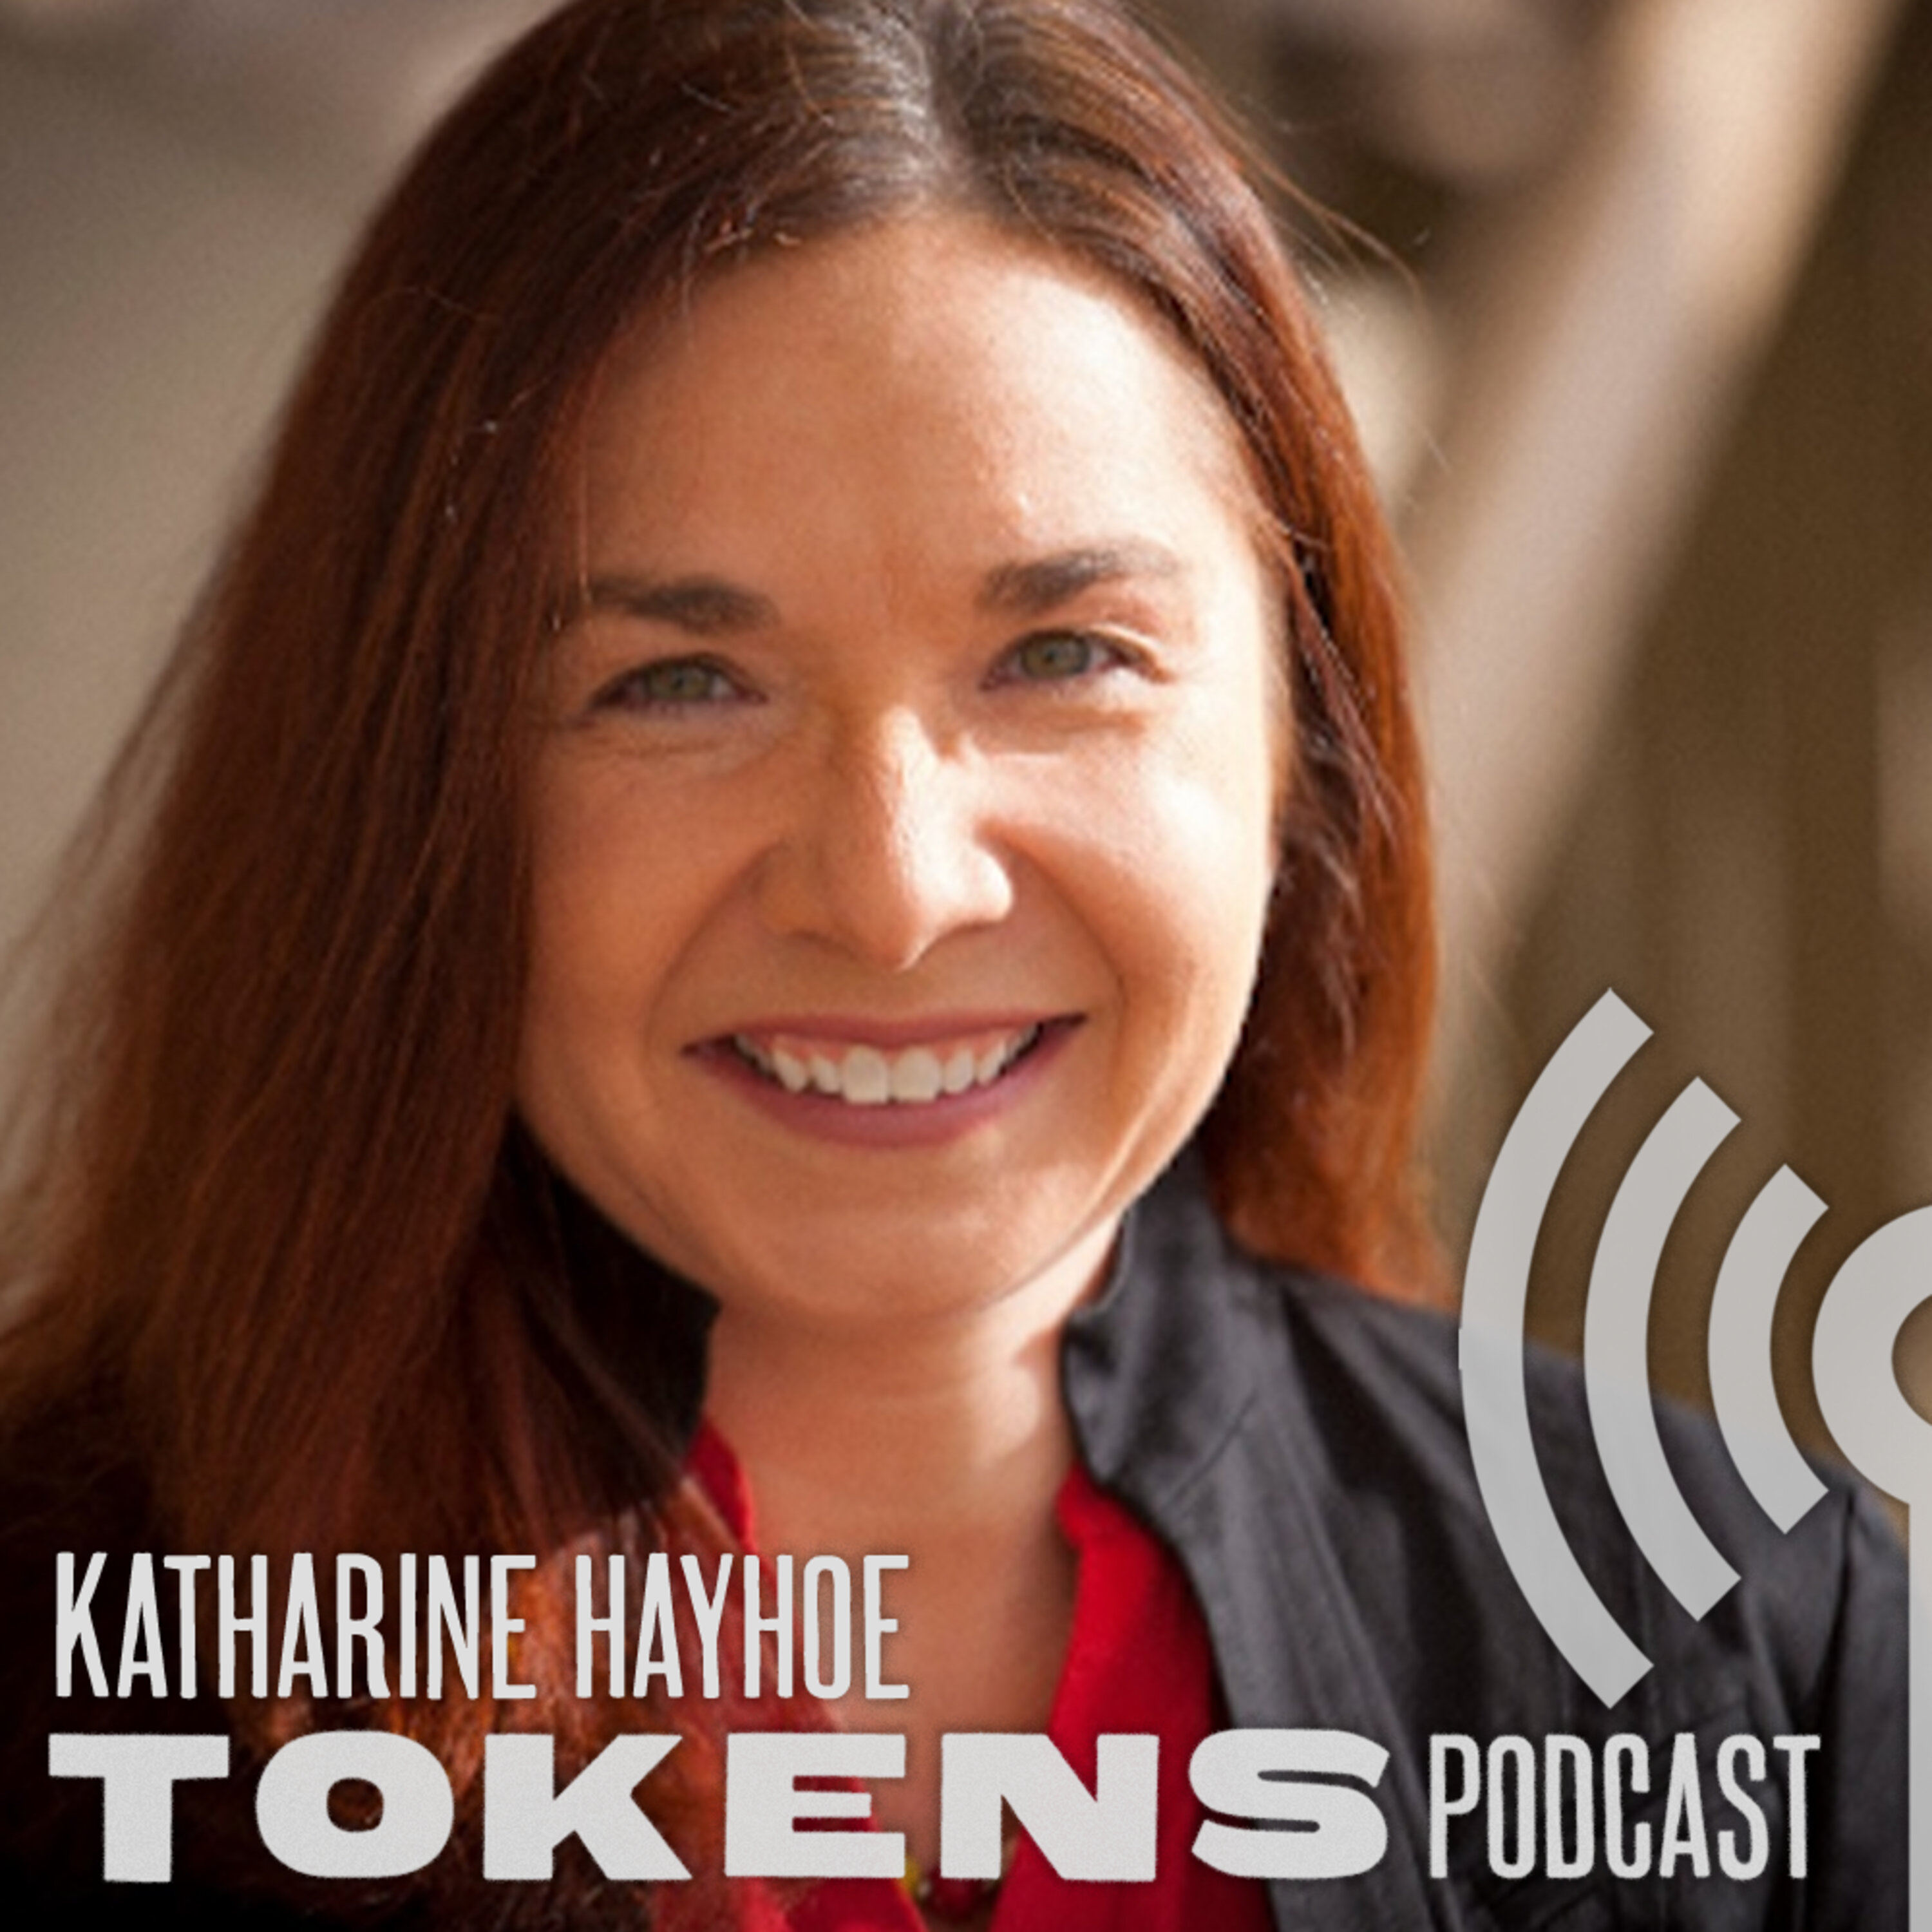 36: “The most polarized issue in the United States”: Katharine Hayhoe